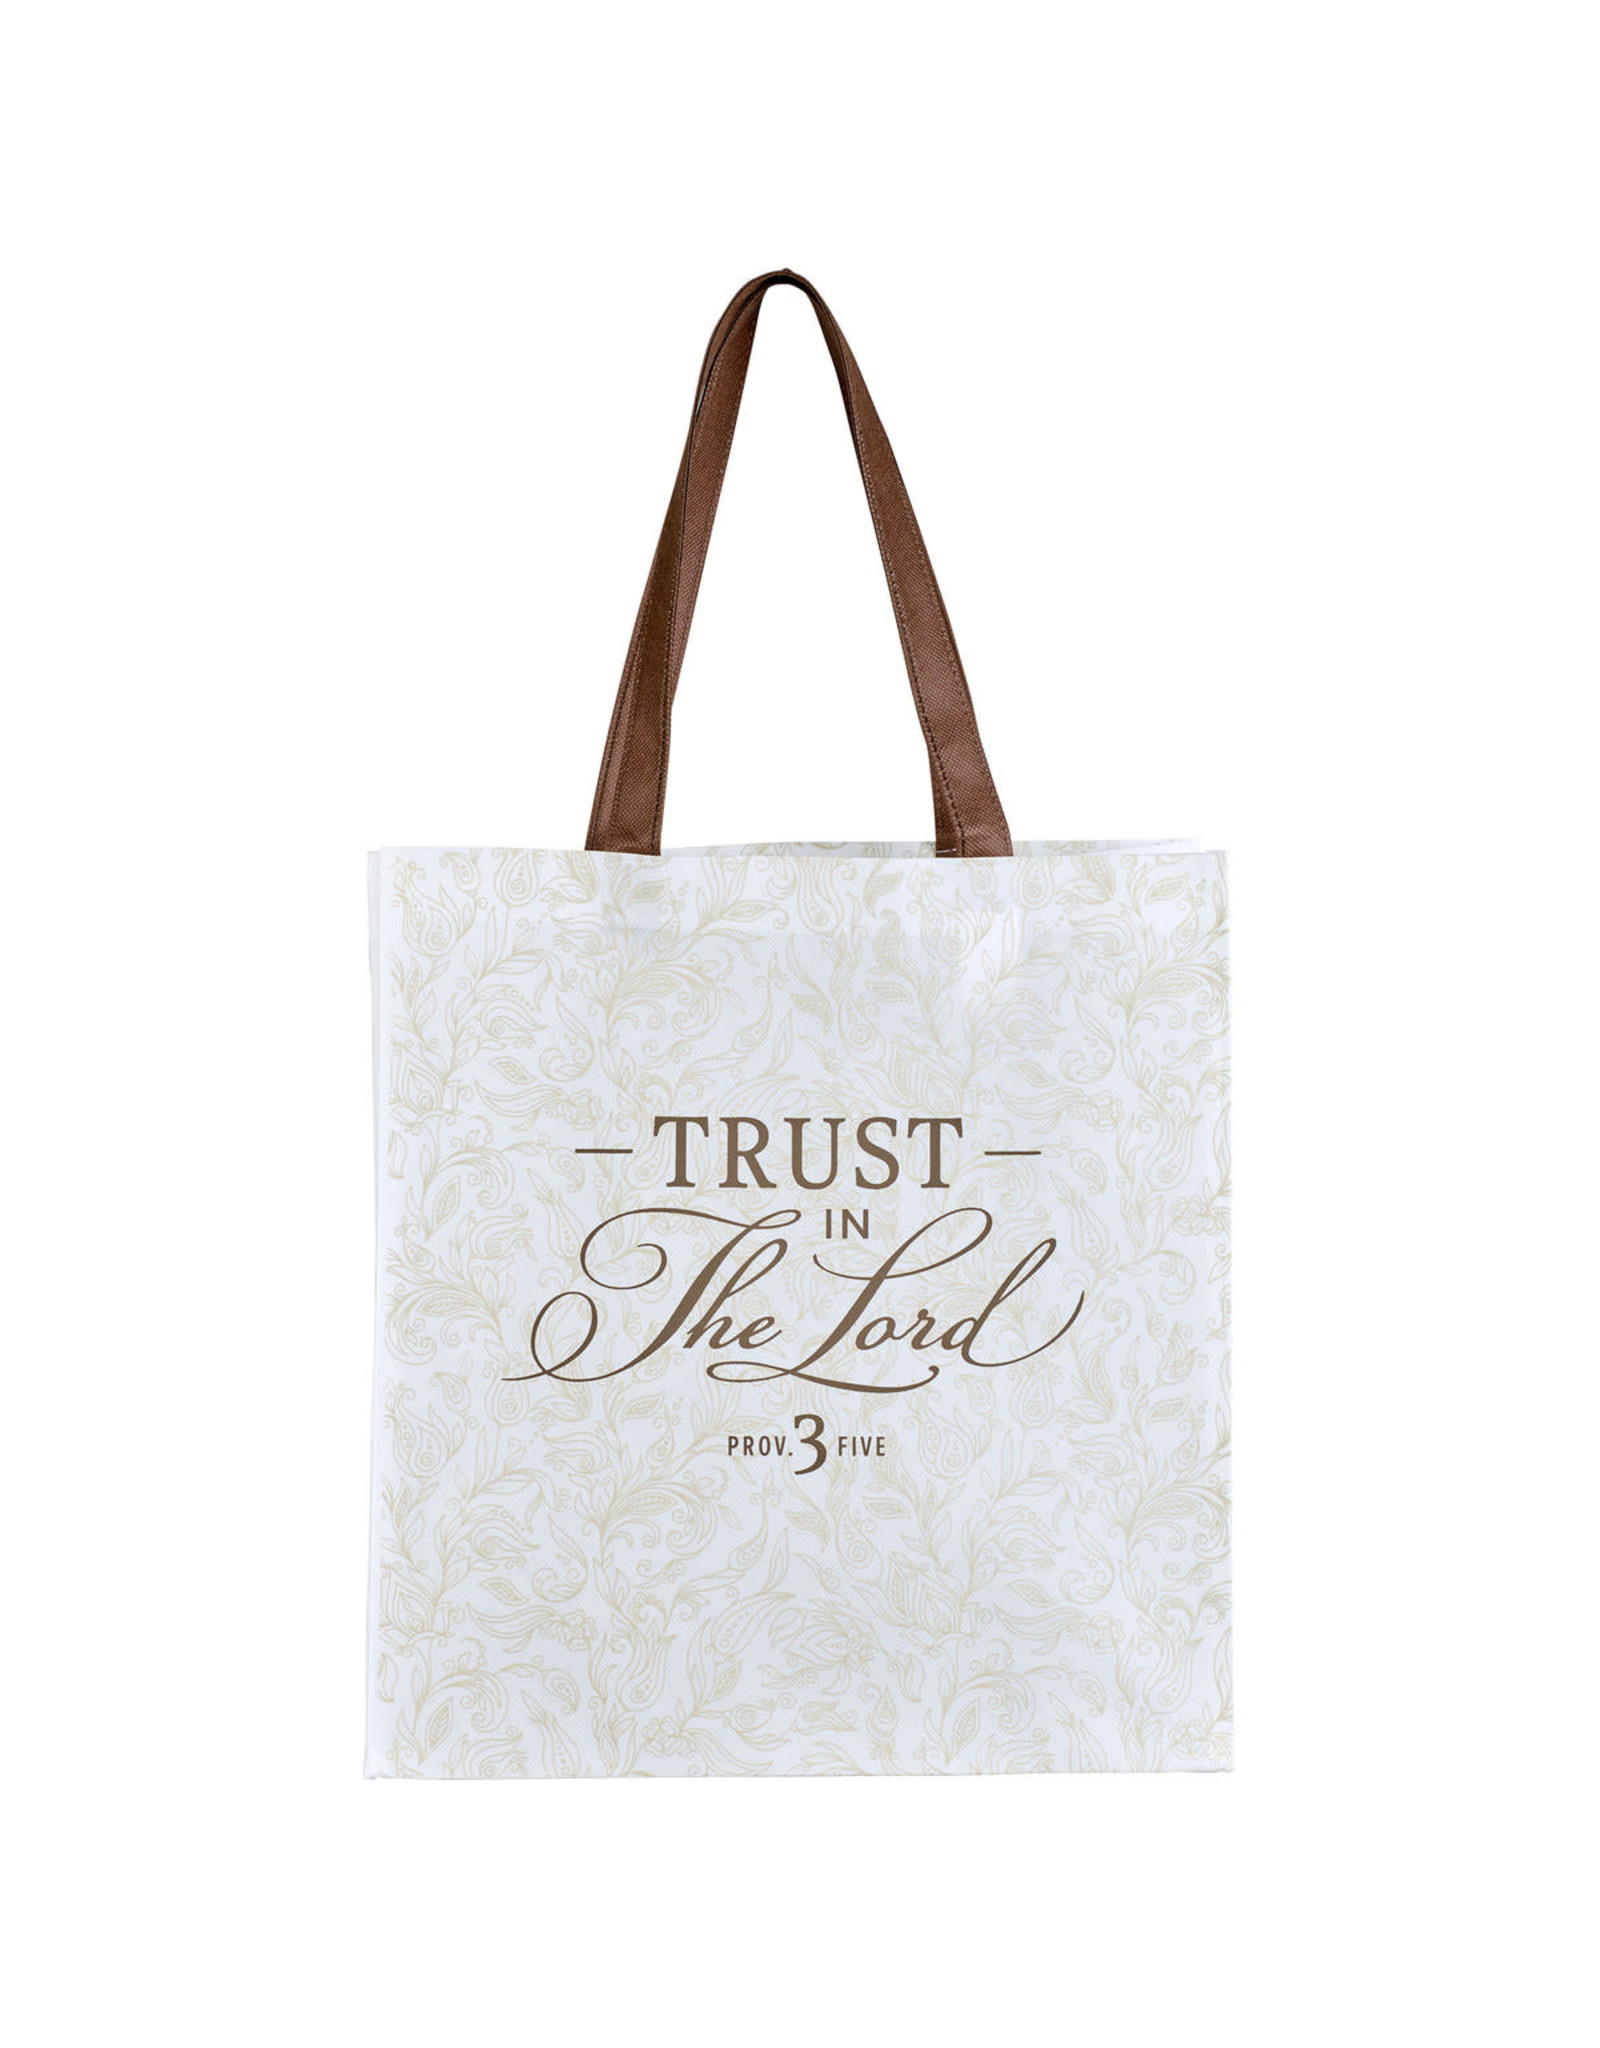 Christian Art Gifts Reusable Shopping Tote Bag - Trust in the Lord (White Floral)